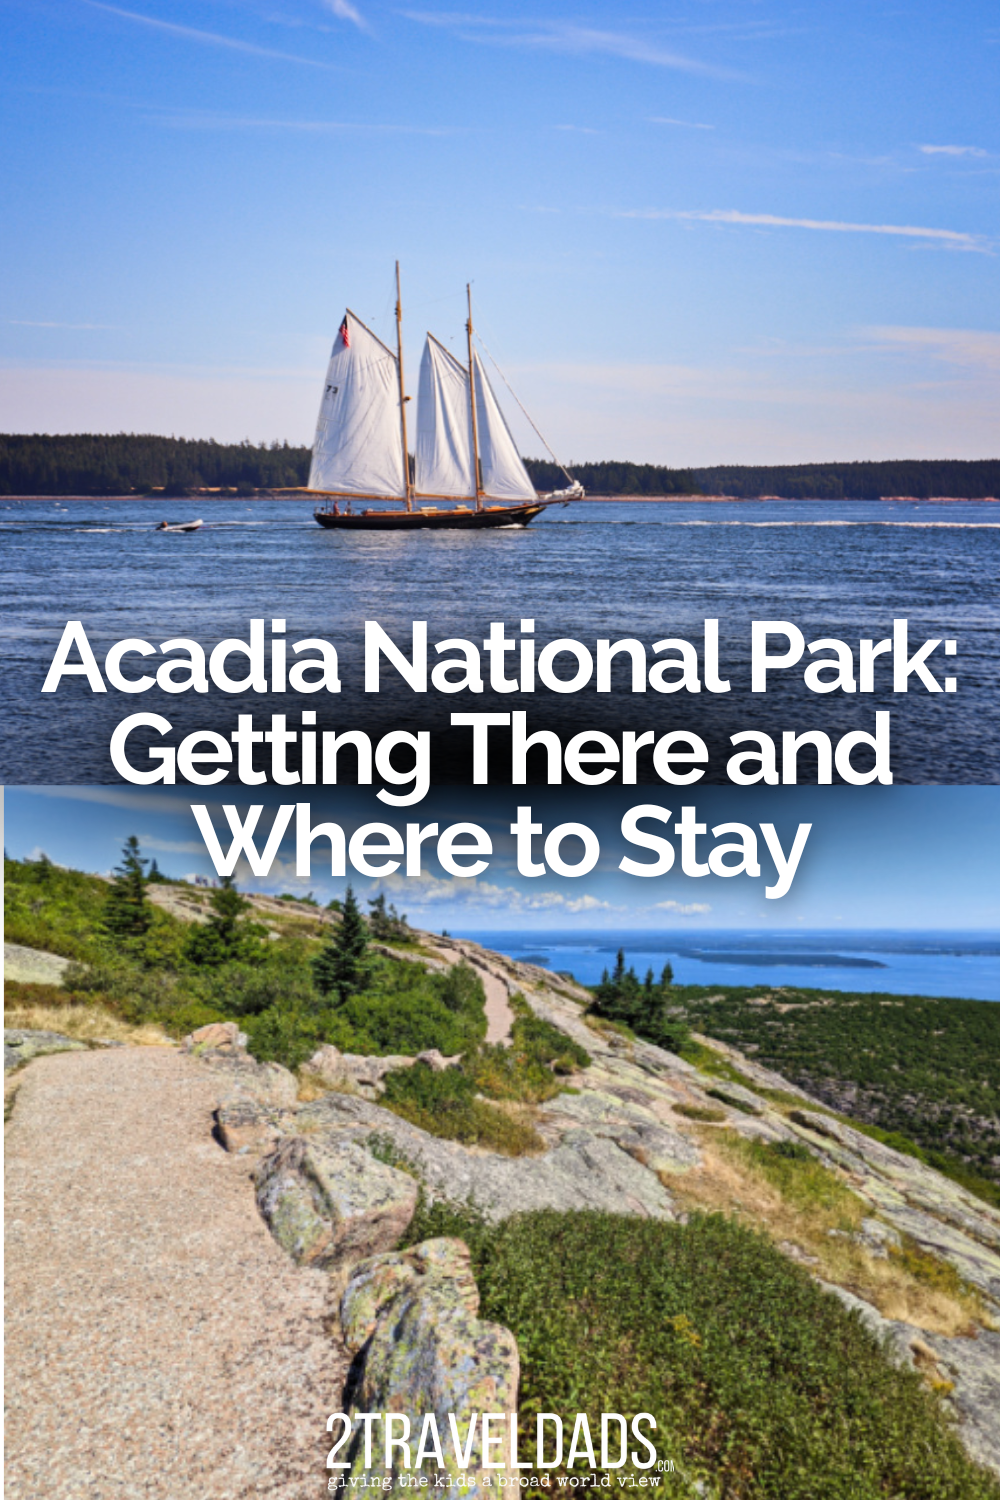 Getting to Acadia National Park isn't too difficult, and neither is finding a great place to stay, but you need to understand just where the Park is and how it's situated before planning.